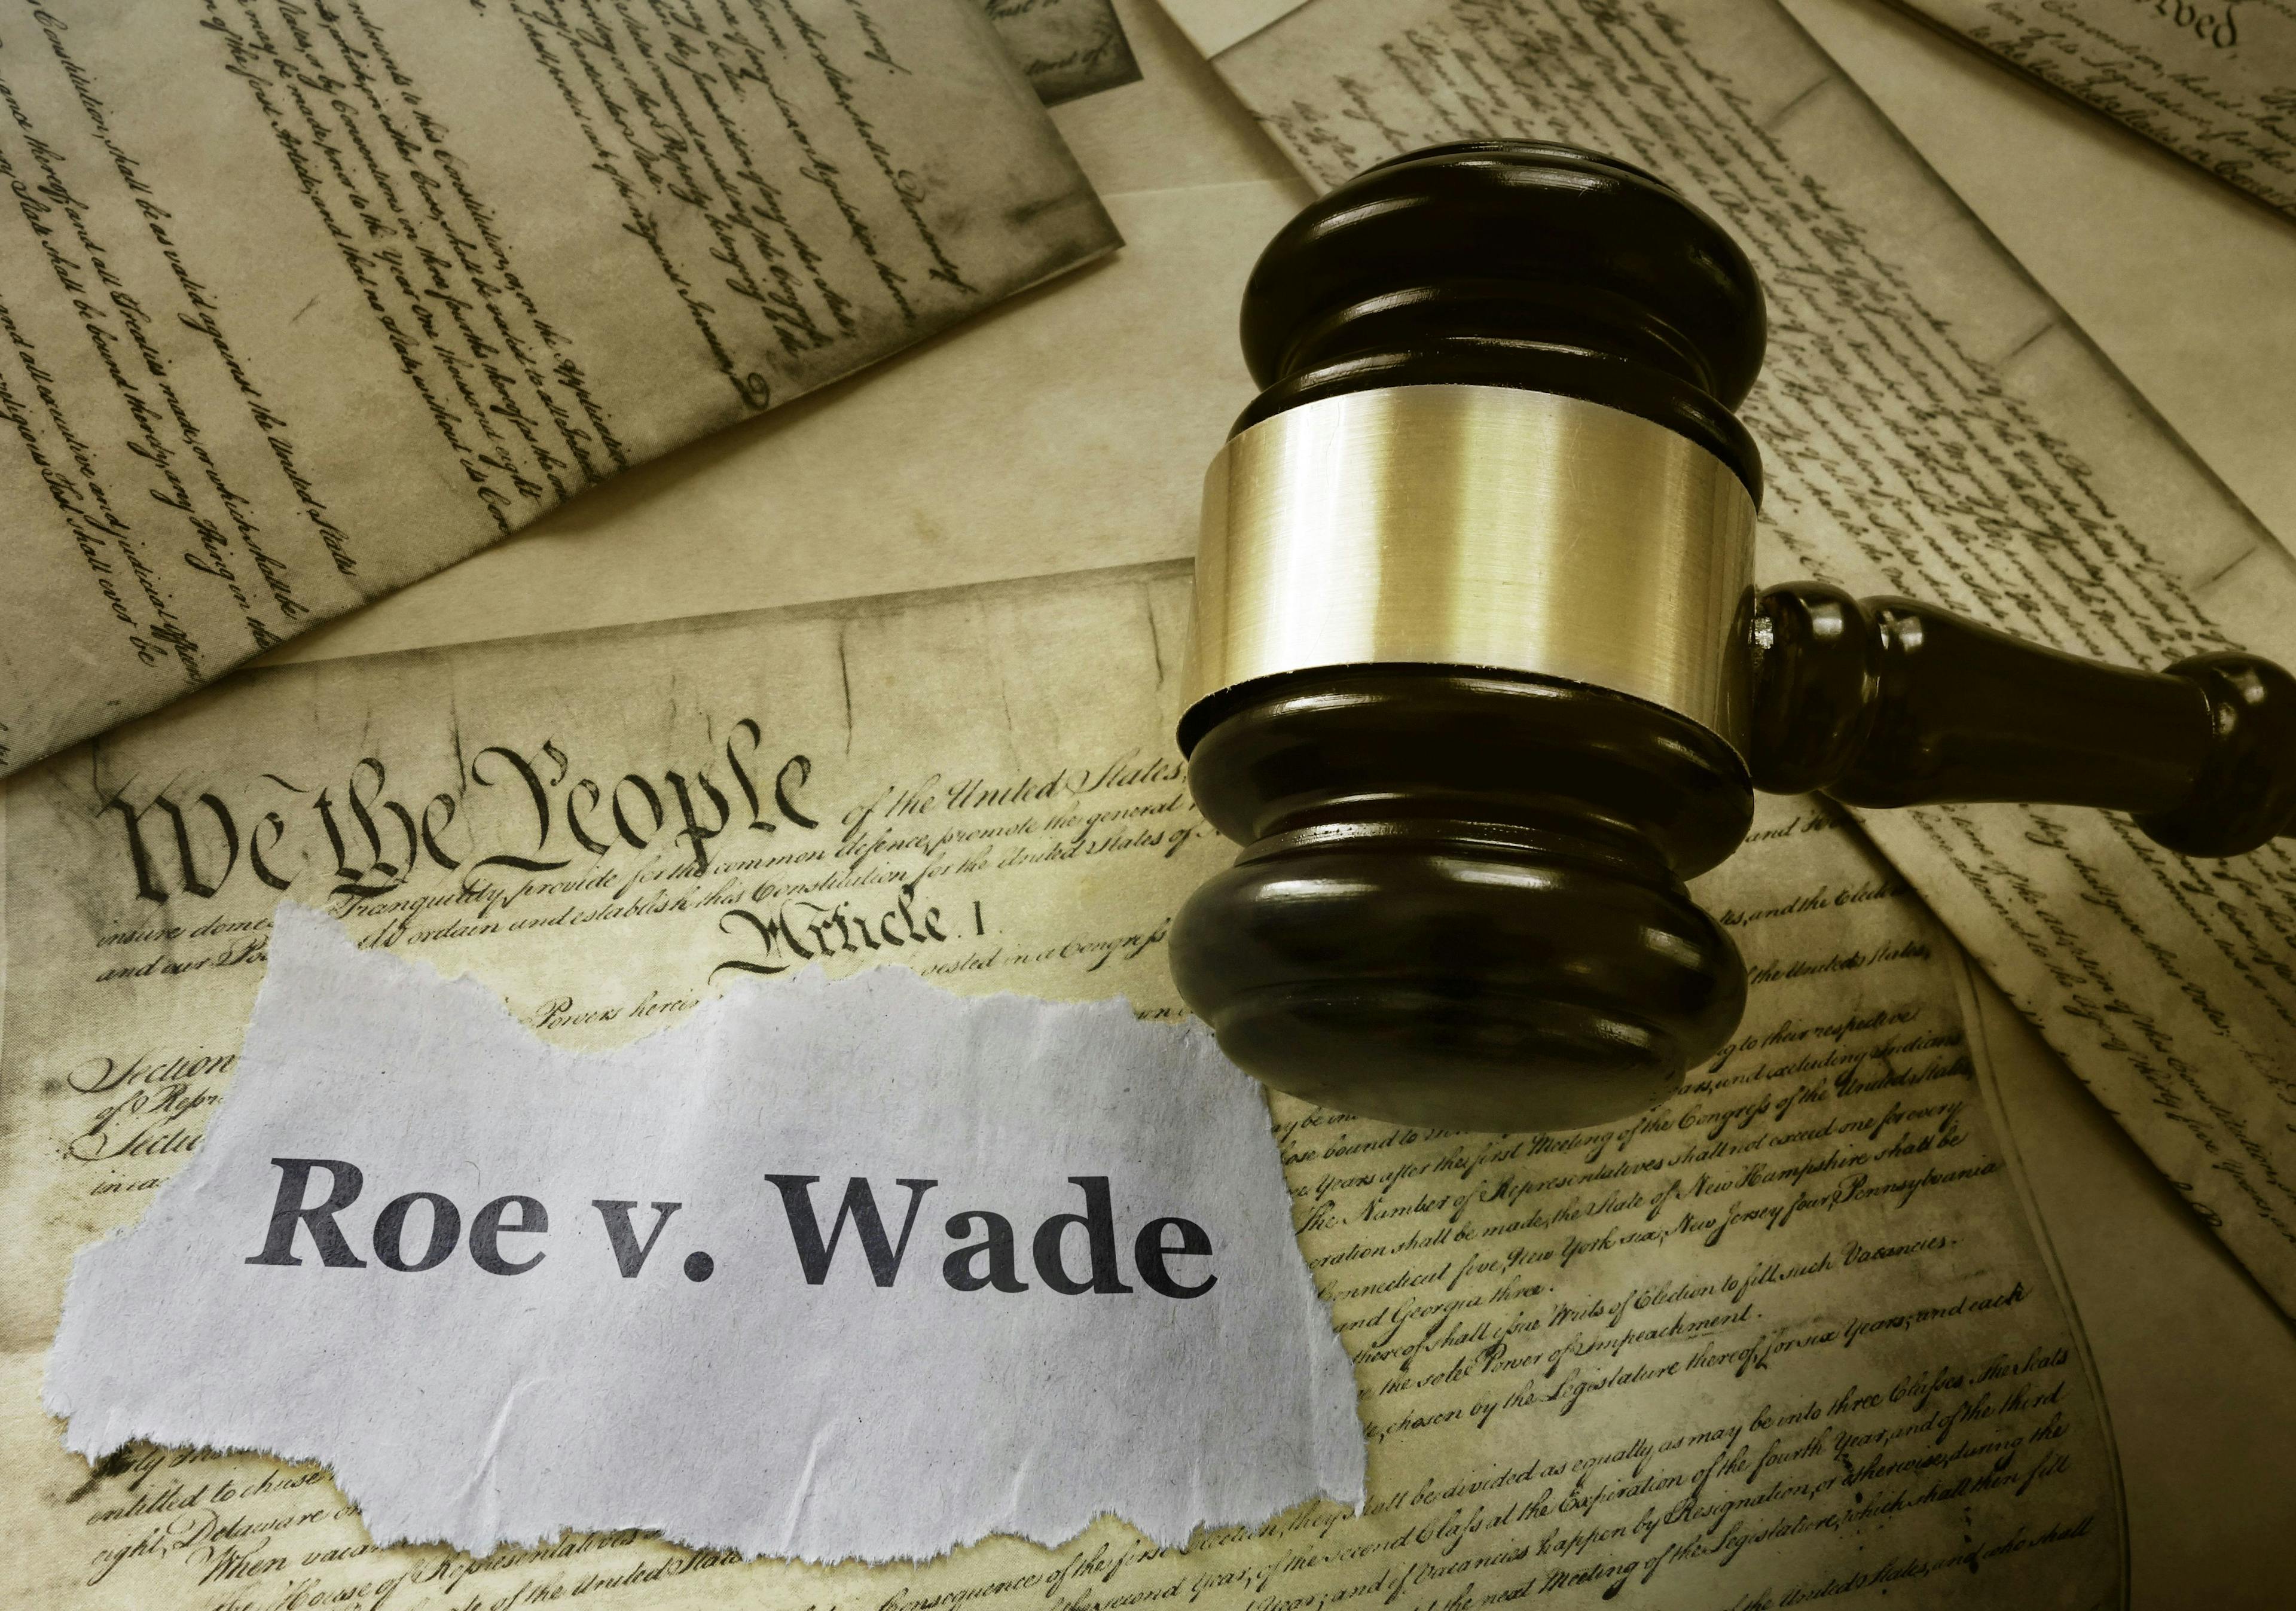 If Roe v Wade is overturned, how will patients with serious mental illness be affected?